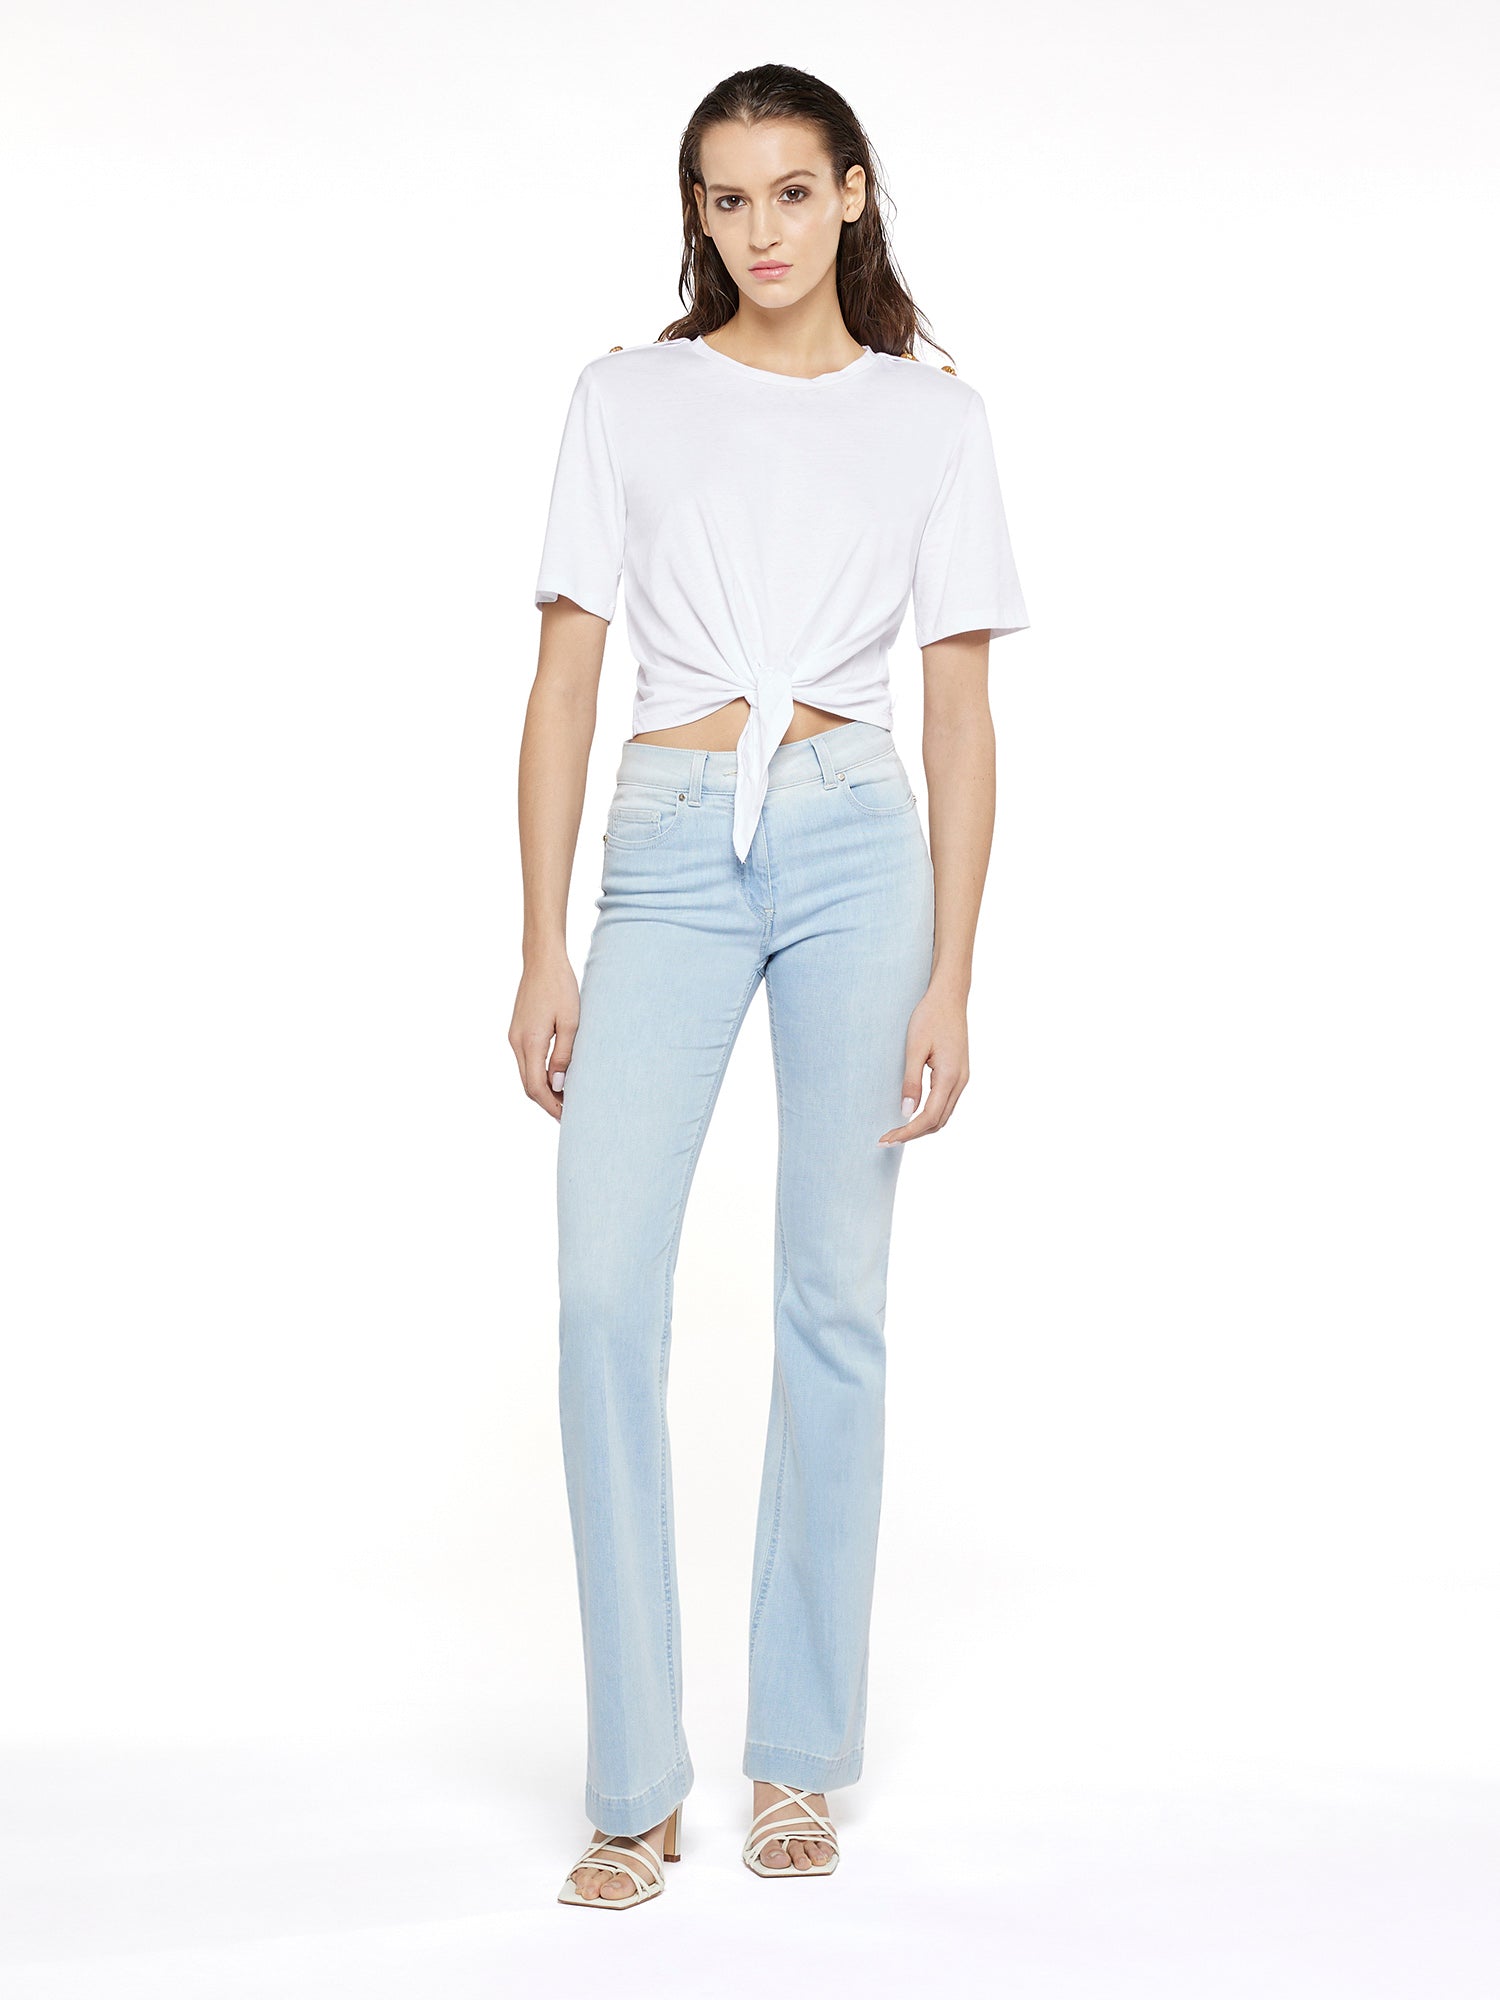 Cropped T-shirt with front knot